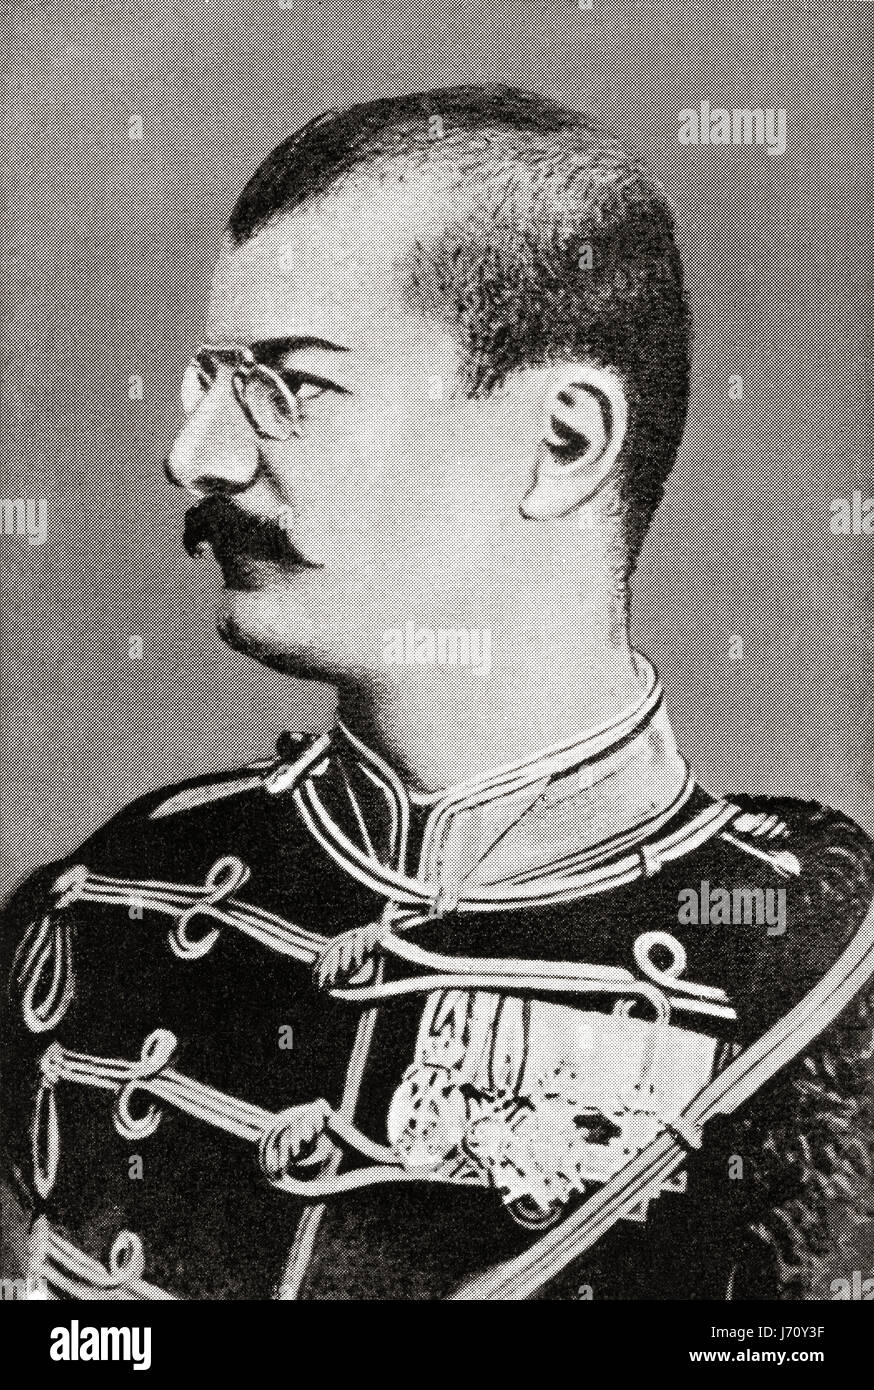 Alexander I or Aleksandar Obrenović,  1876 – 1903.  King of Serbia.  From Hutchinson's History of the Nations, published 1915. Stock Photo